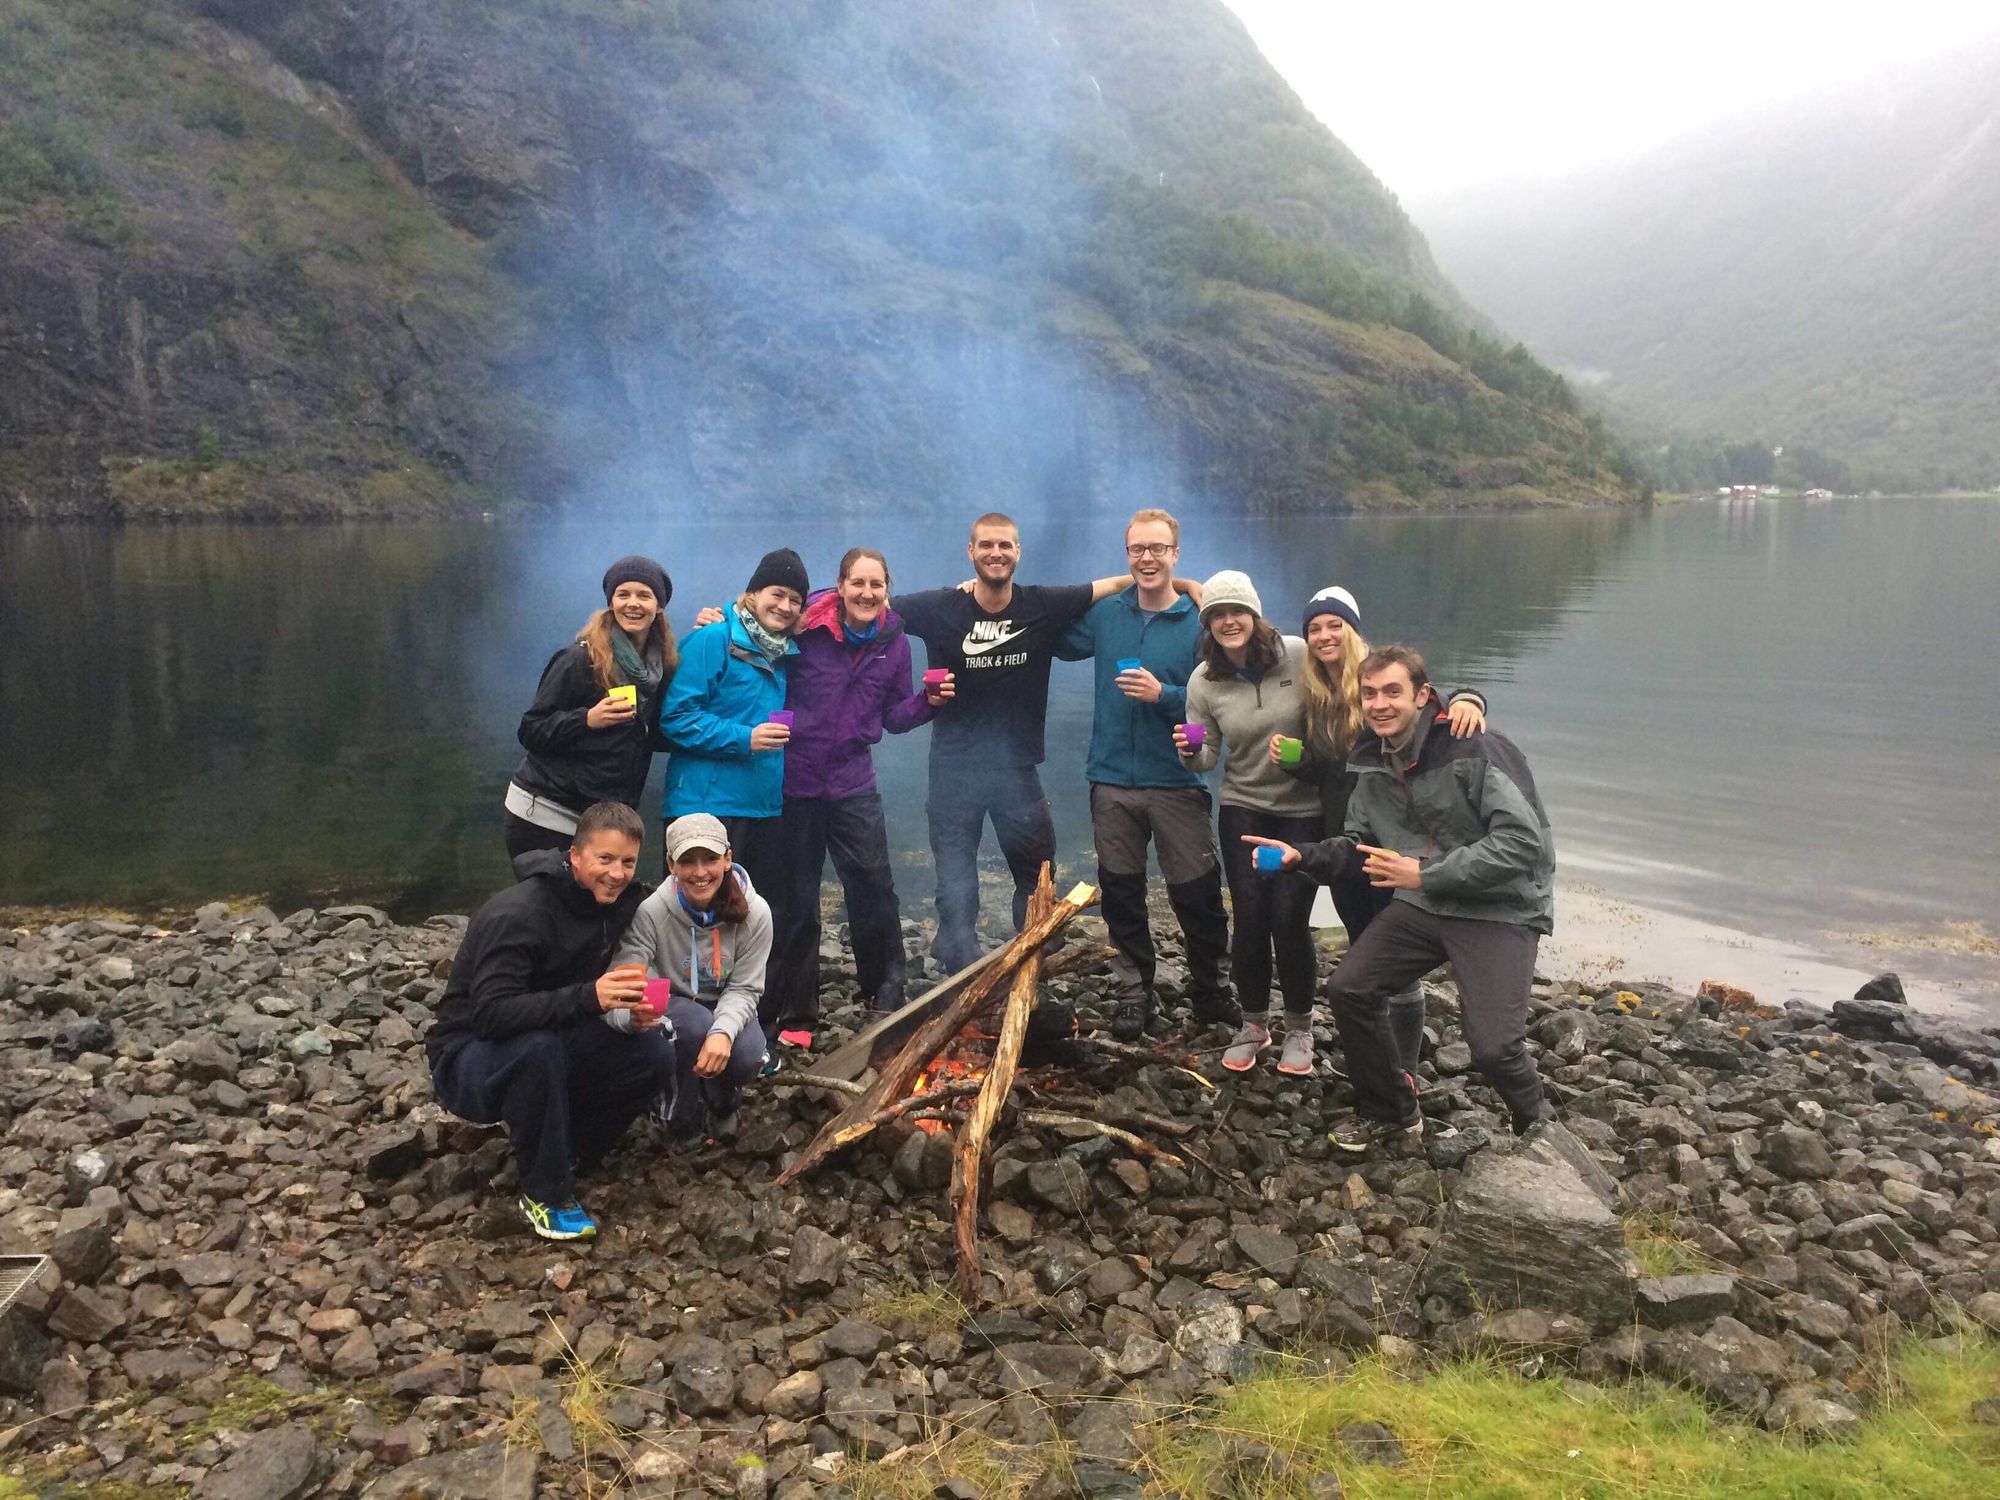 A group brought together by kayaks, fjords and Norwegian scenery.